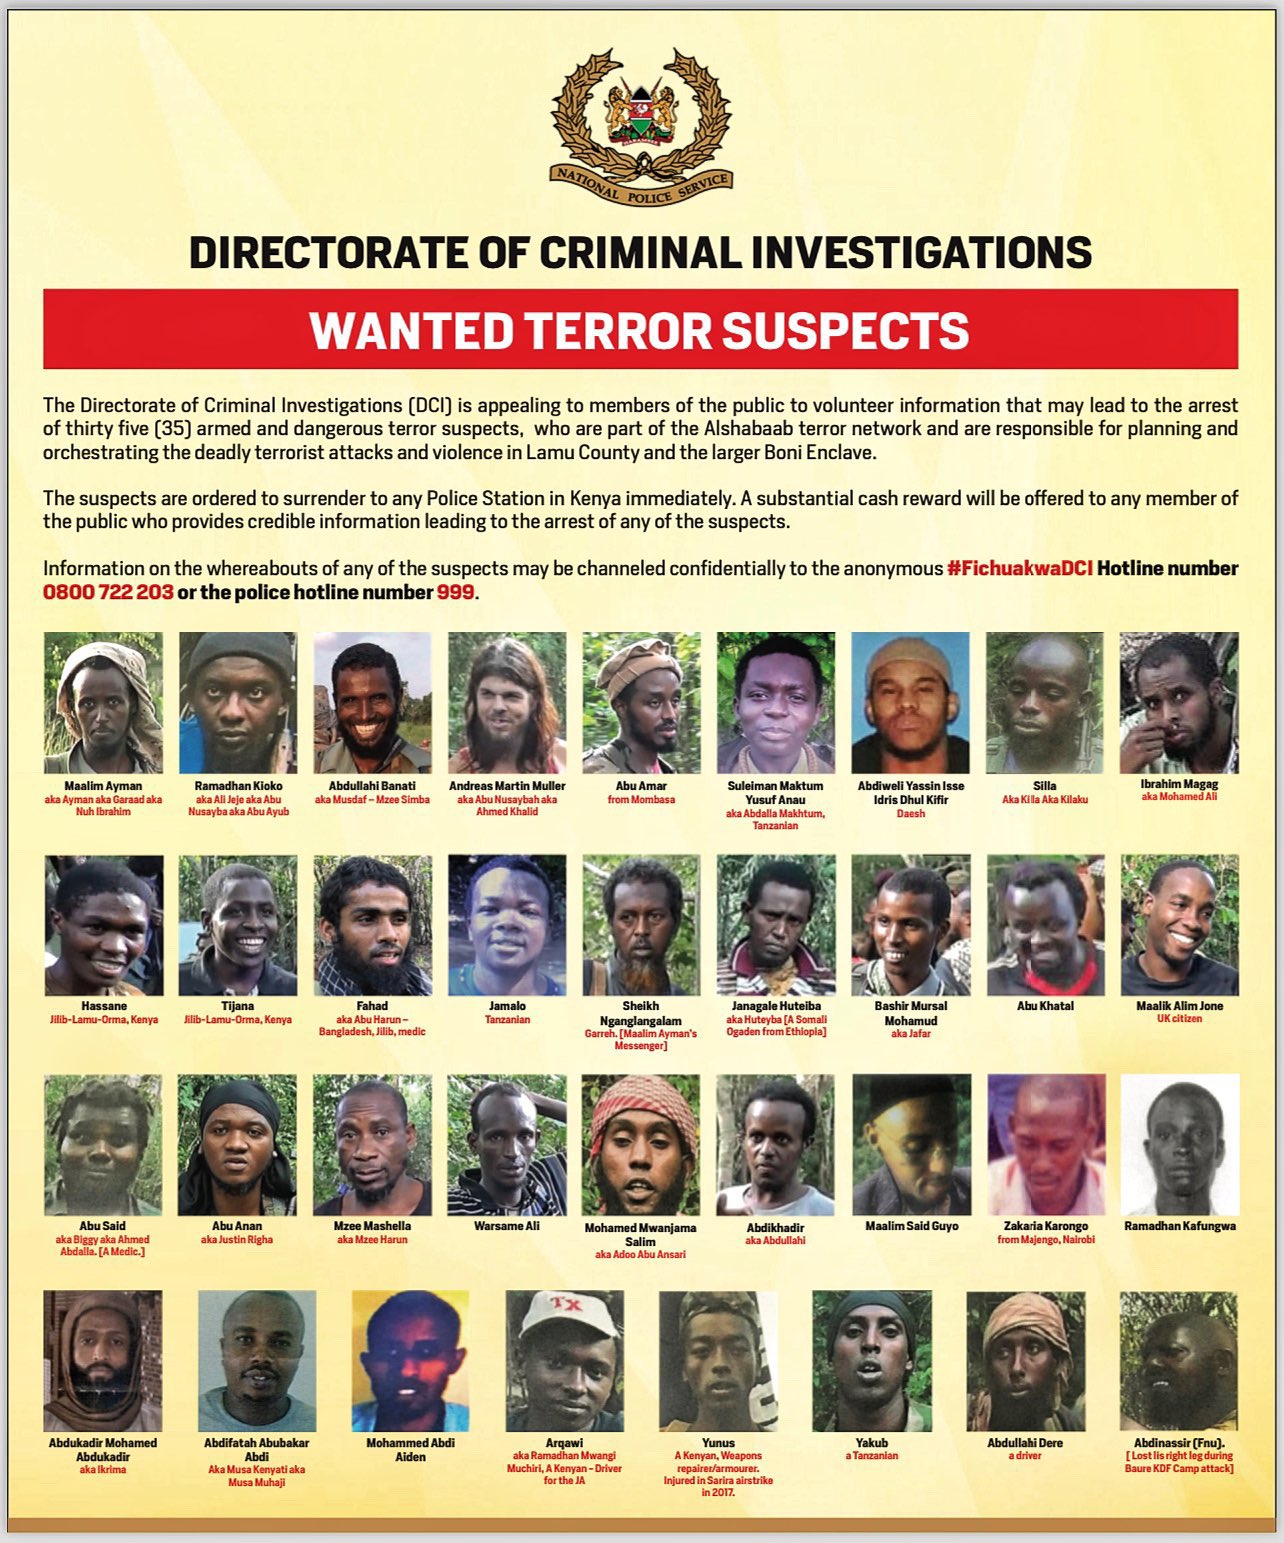 The 35 suspects are linked to Al-Shabaab.